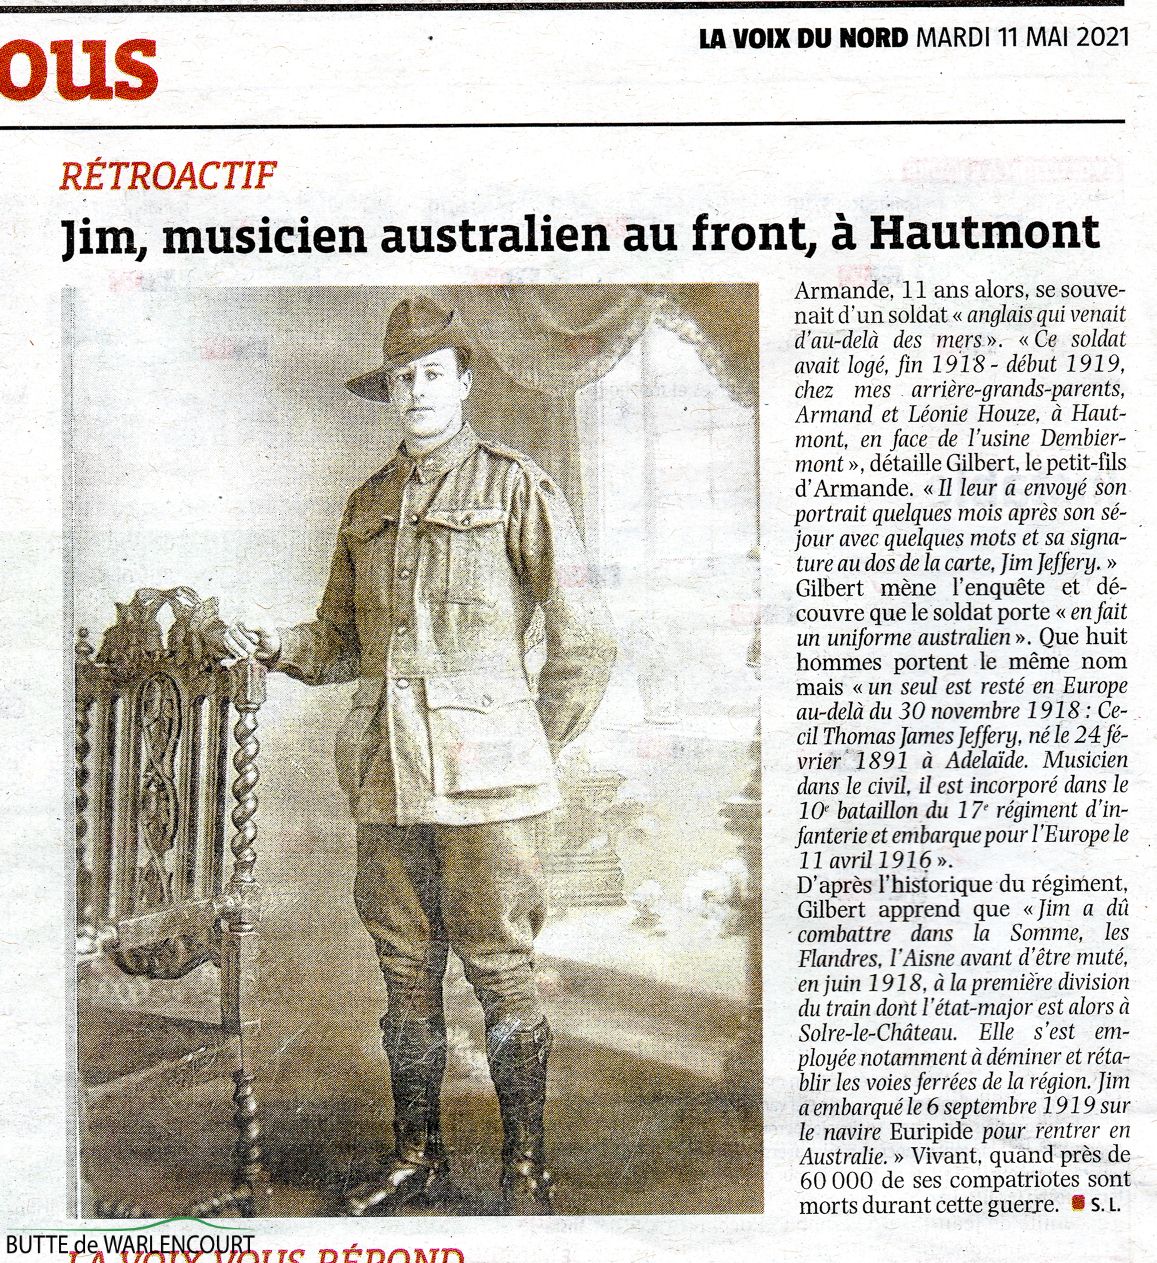 "A nice interesting article in the Voix du Nord".  100 years later WW1 is still getting articles in the press! Taken by Charles Crossan May 2021